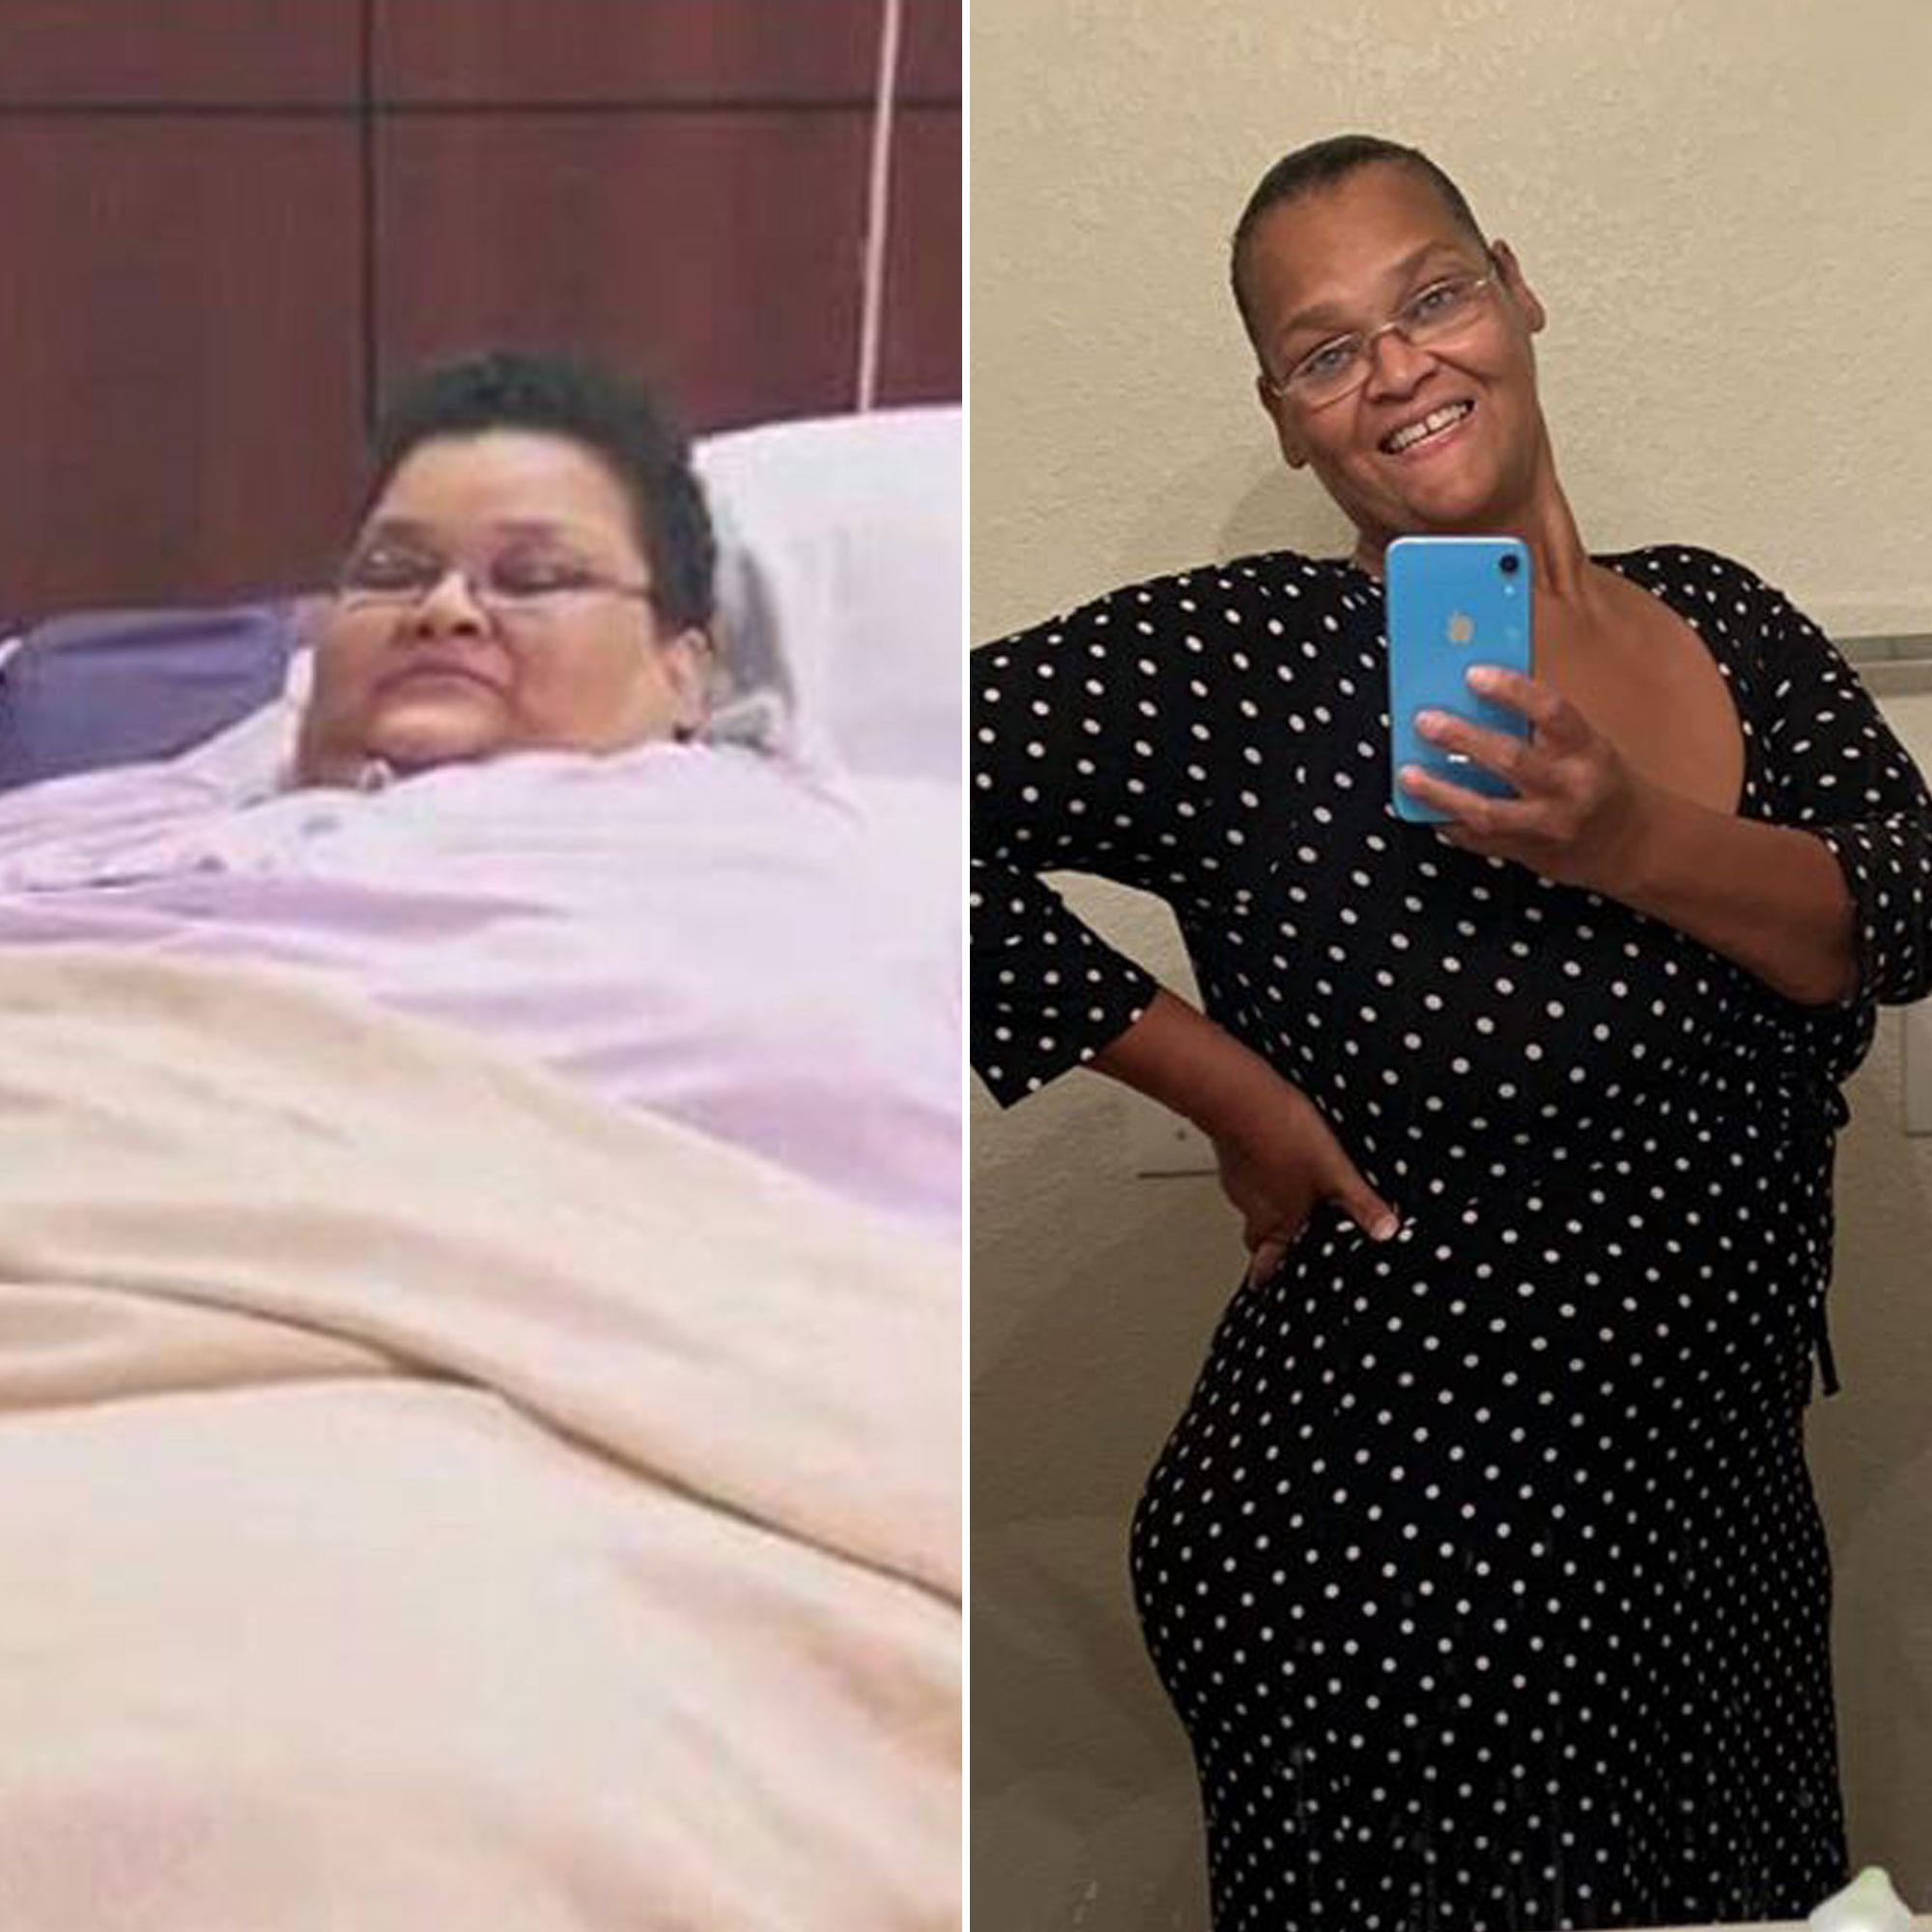 My 600-lb Life': Here's a look at Dr Nowrazadan's controversial career,  including a lawsuit for malpractice